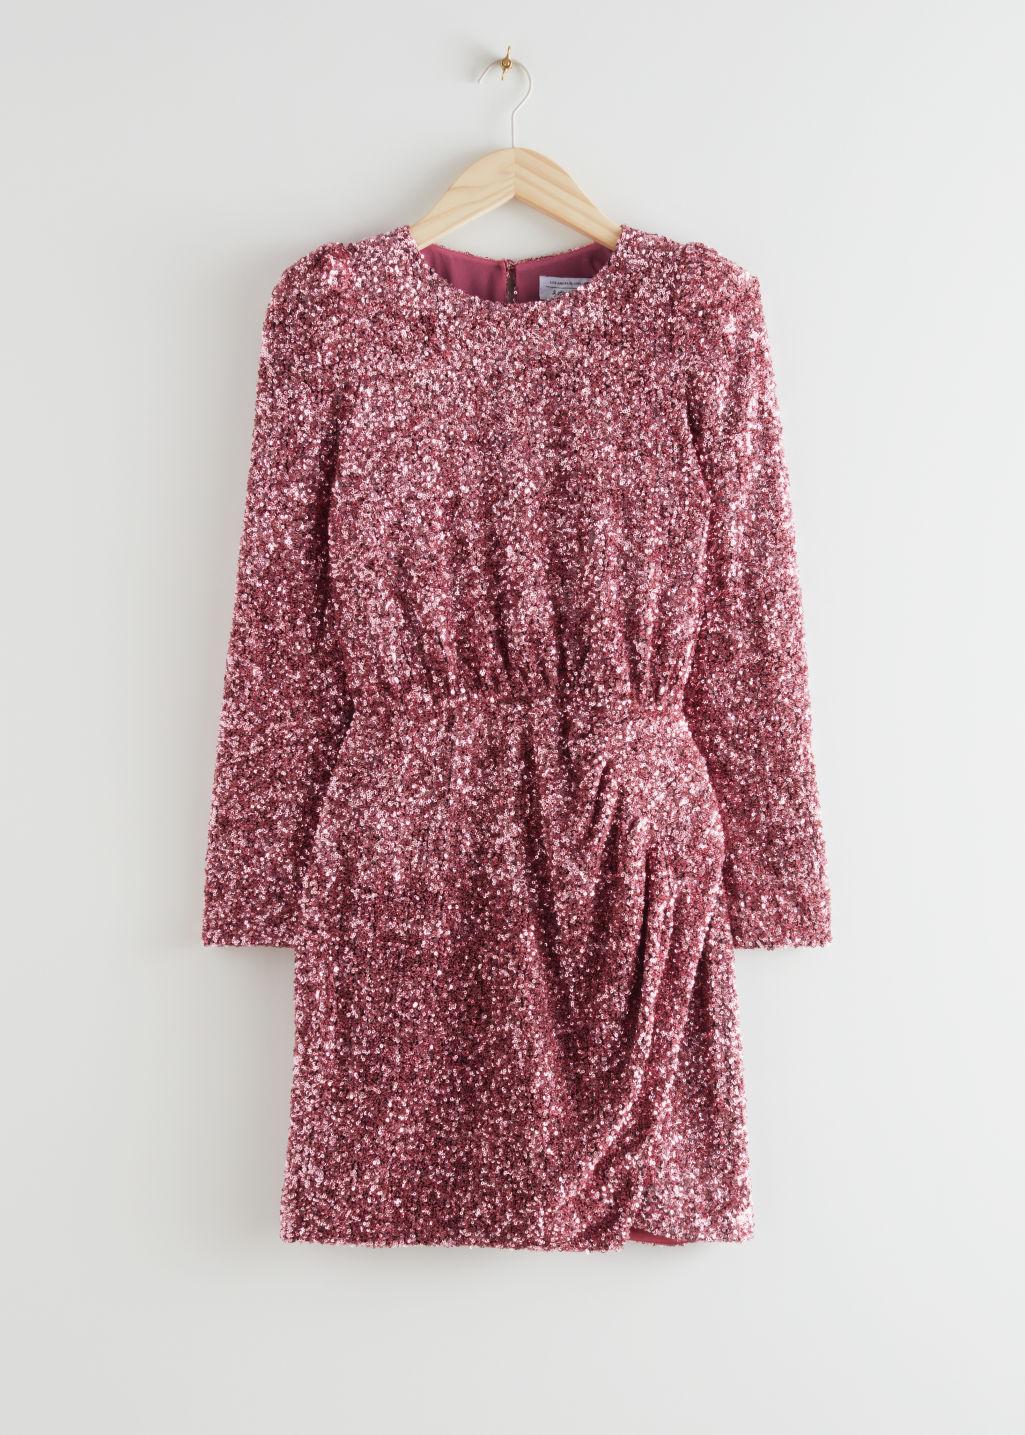 & Other Stories Padded Shoulder Sequin Dress in Pink | Lyst